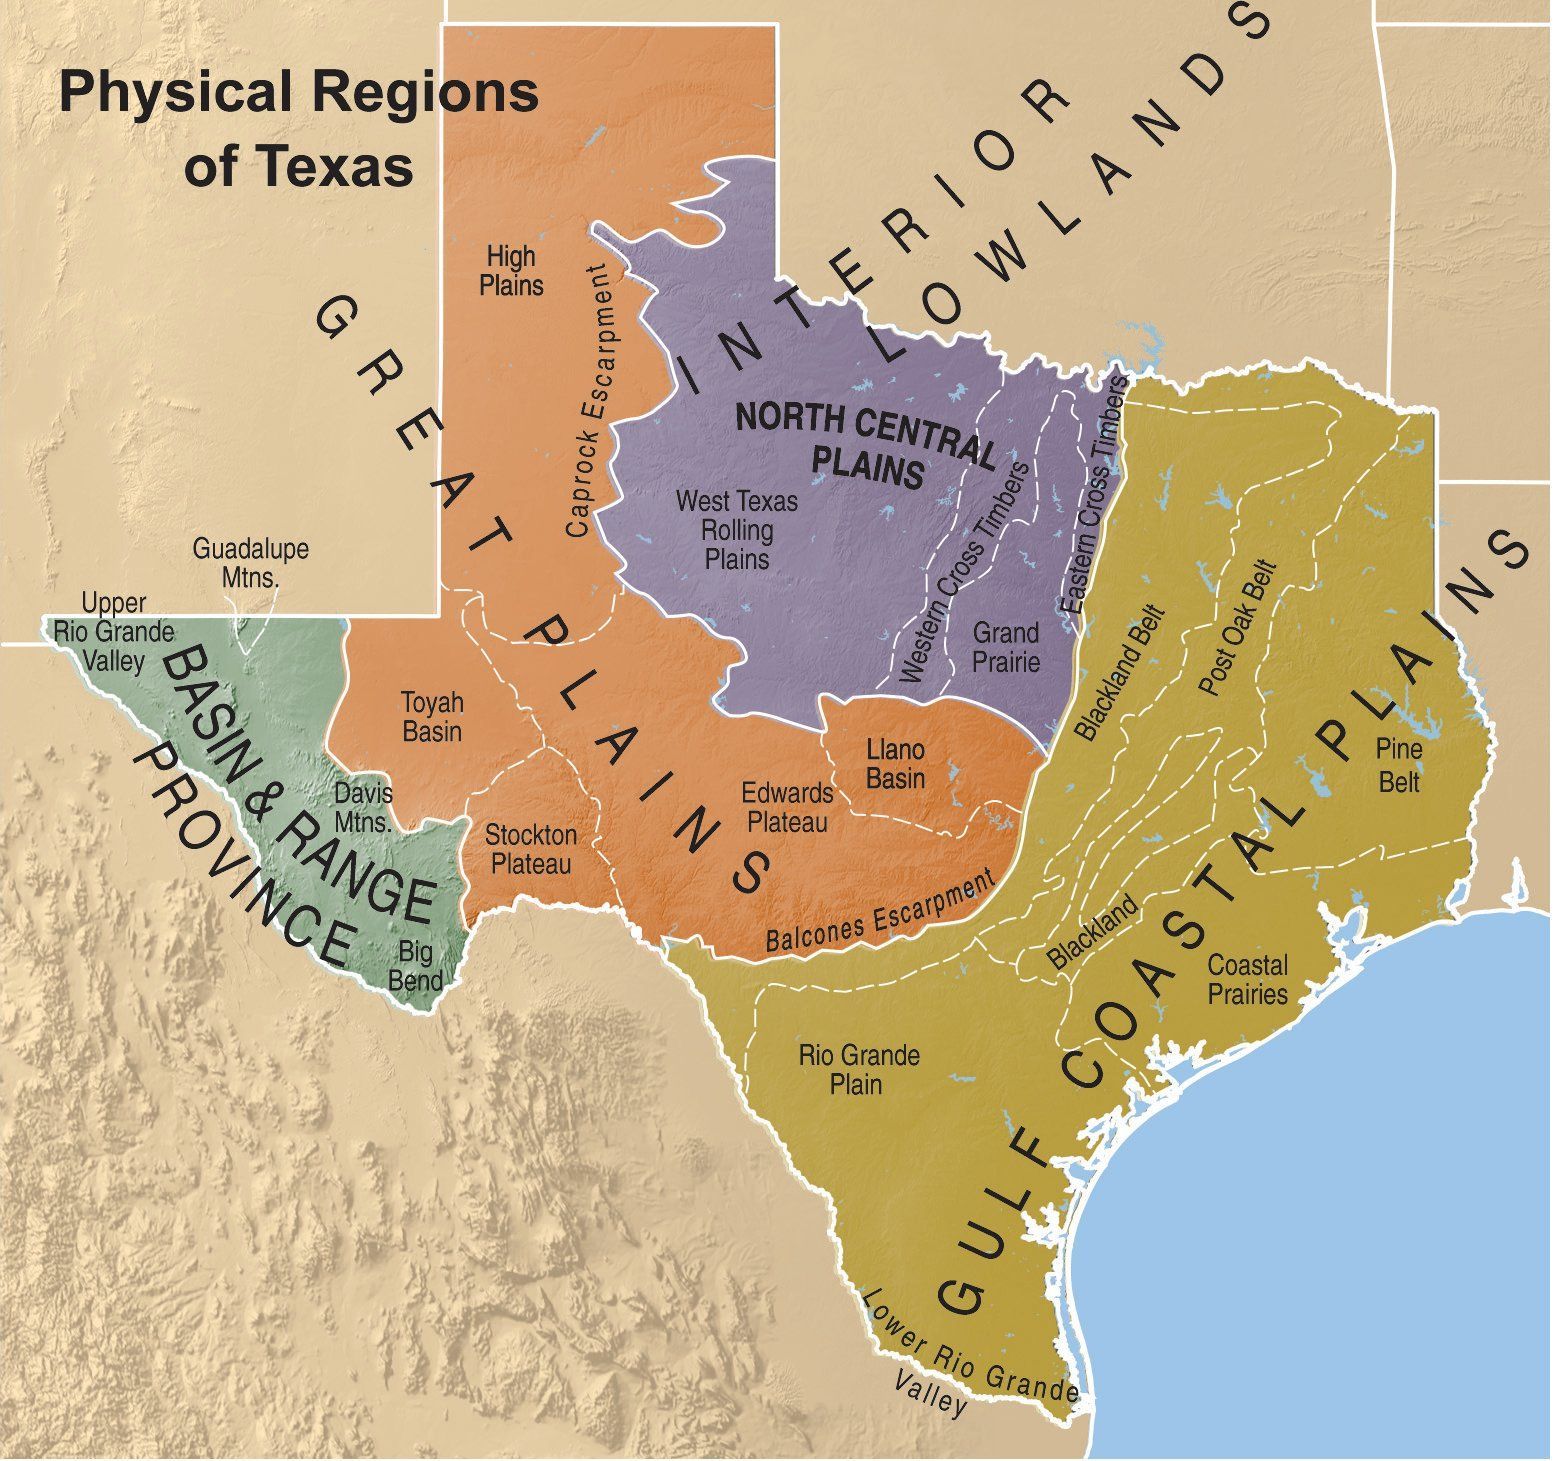 This image shows the breakdown of the regions in Texas.